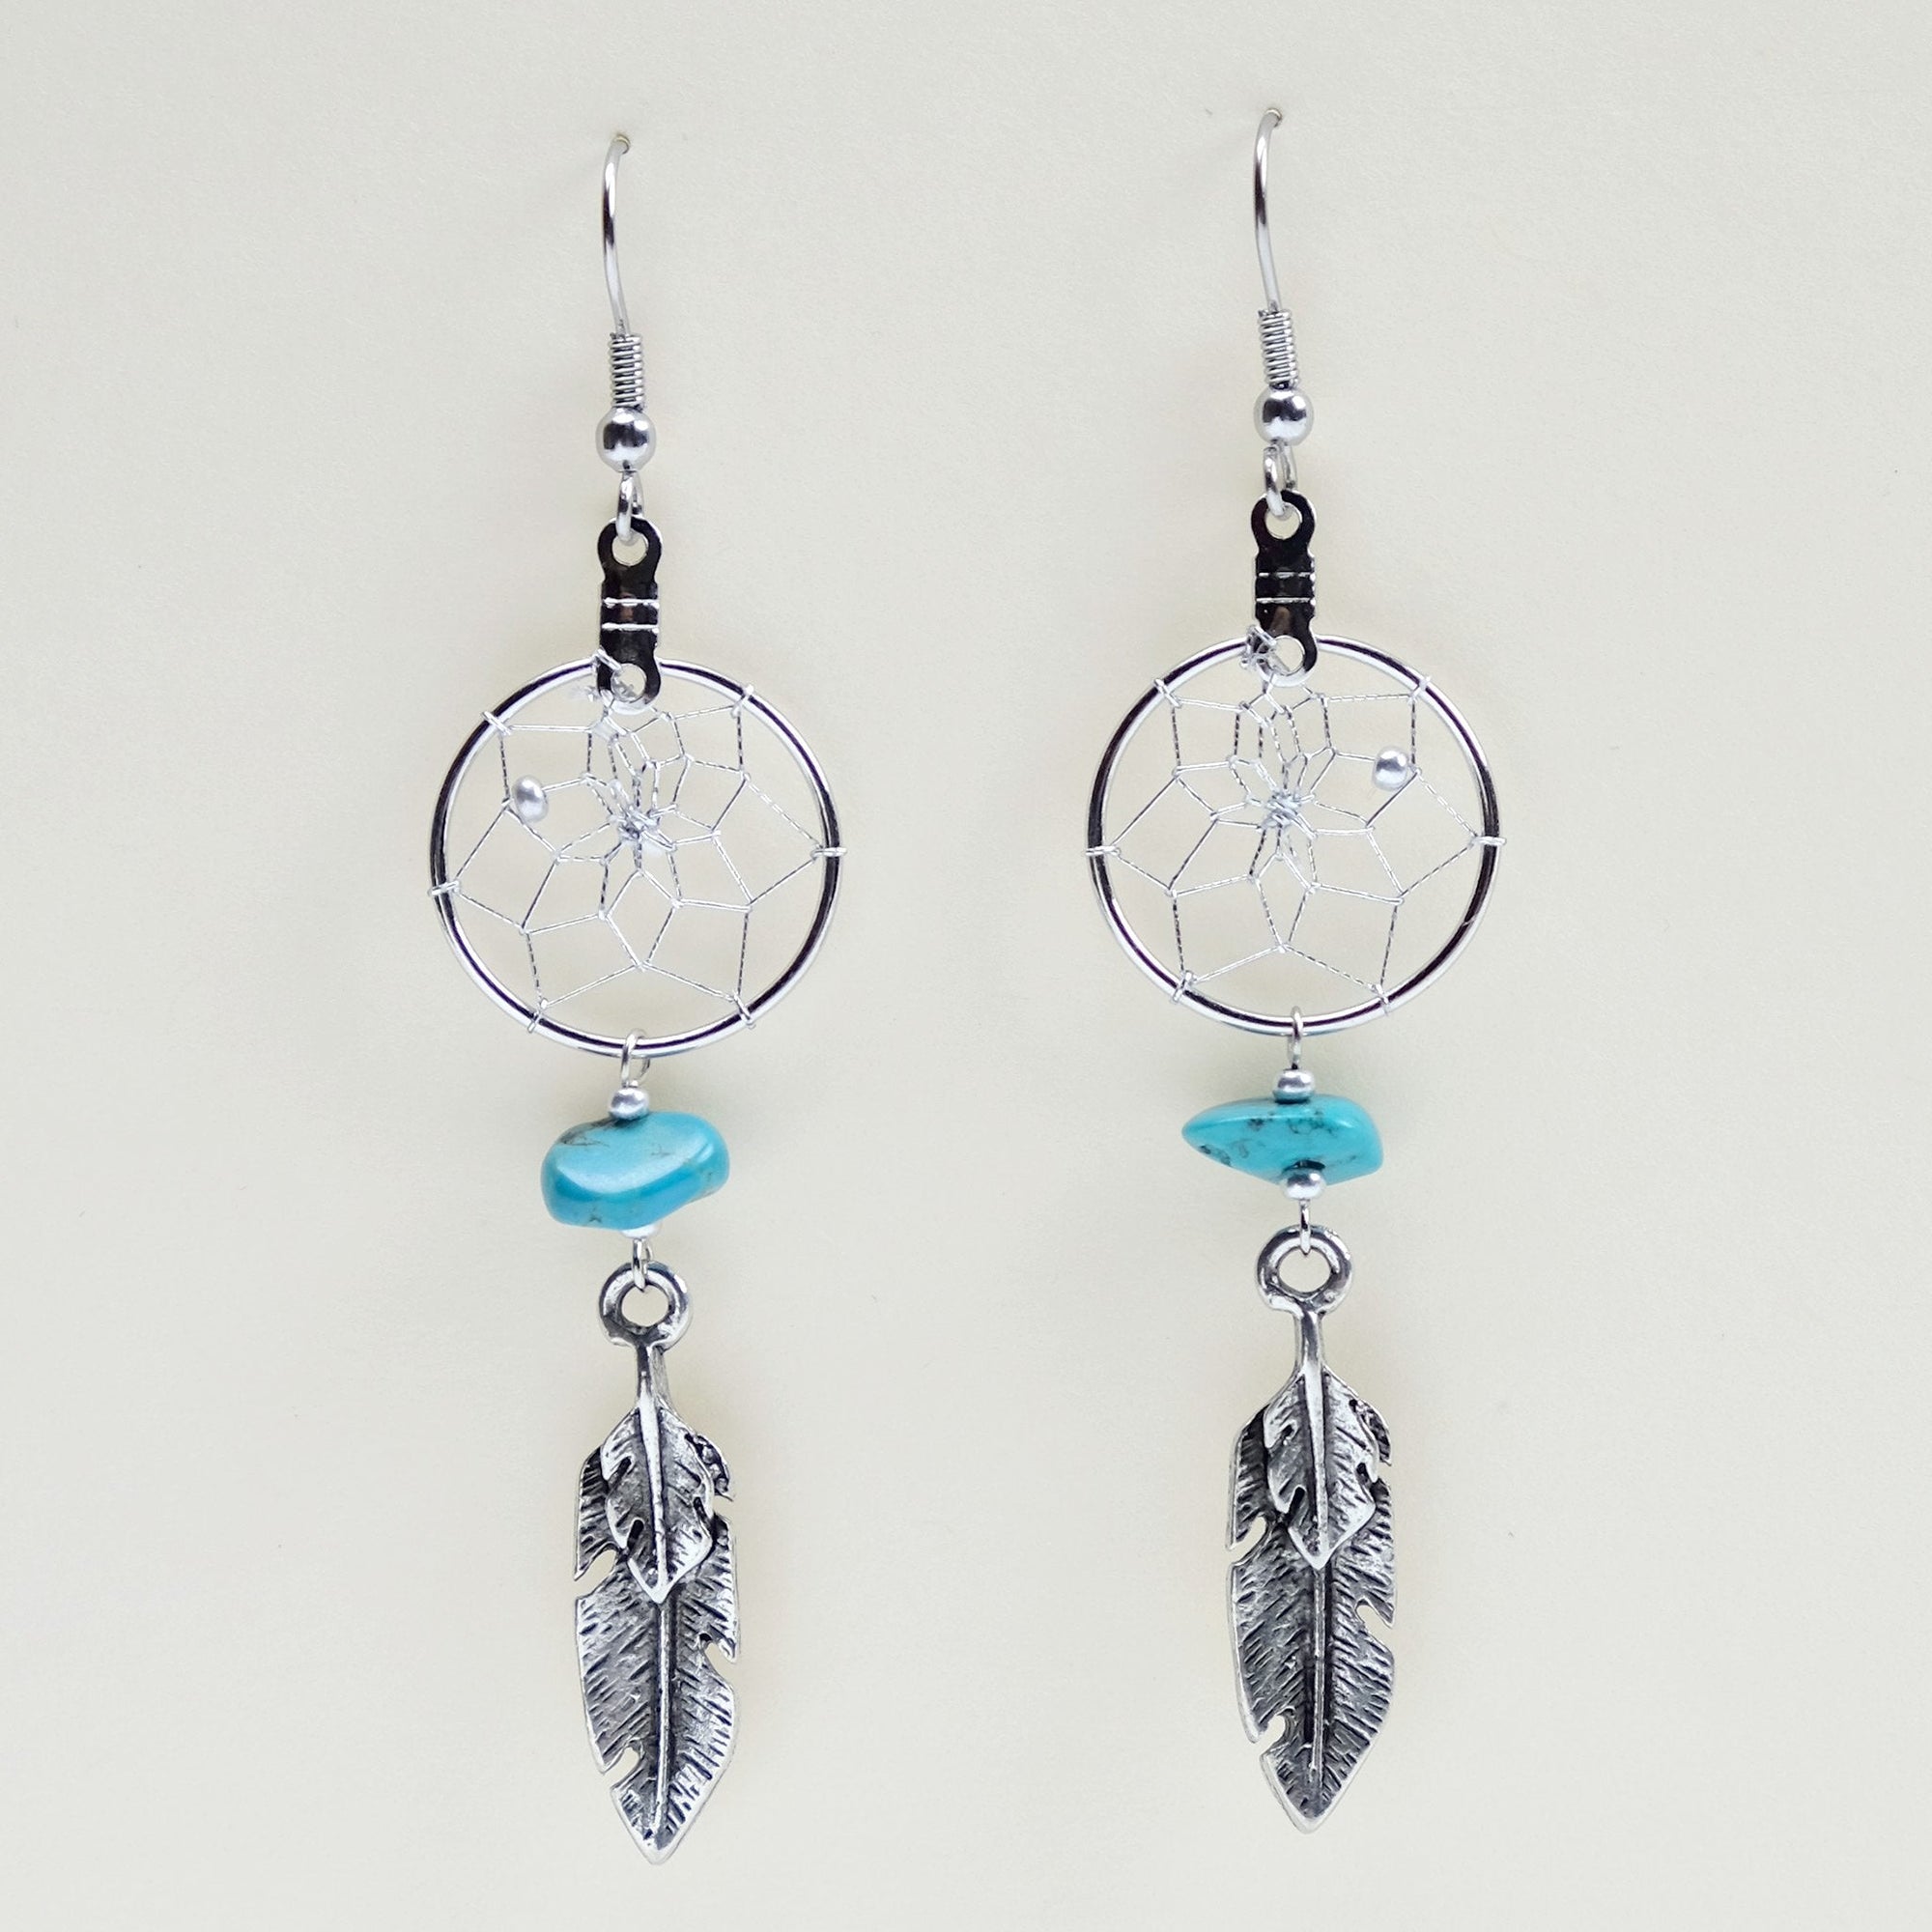 Earrings Dream Catcher Jewellery with Semi-precious Stones - Earrings Dream Catcher Jewellery with Semi-precious Stones -  - House of Himwitsa Native Art Gallery and Gifts